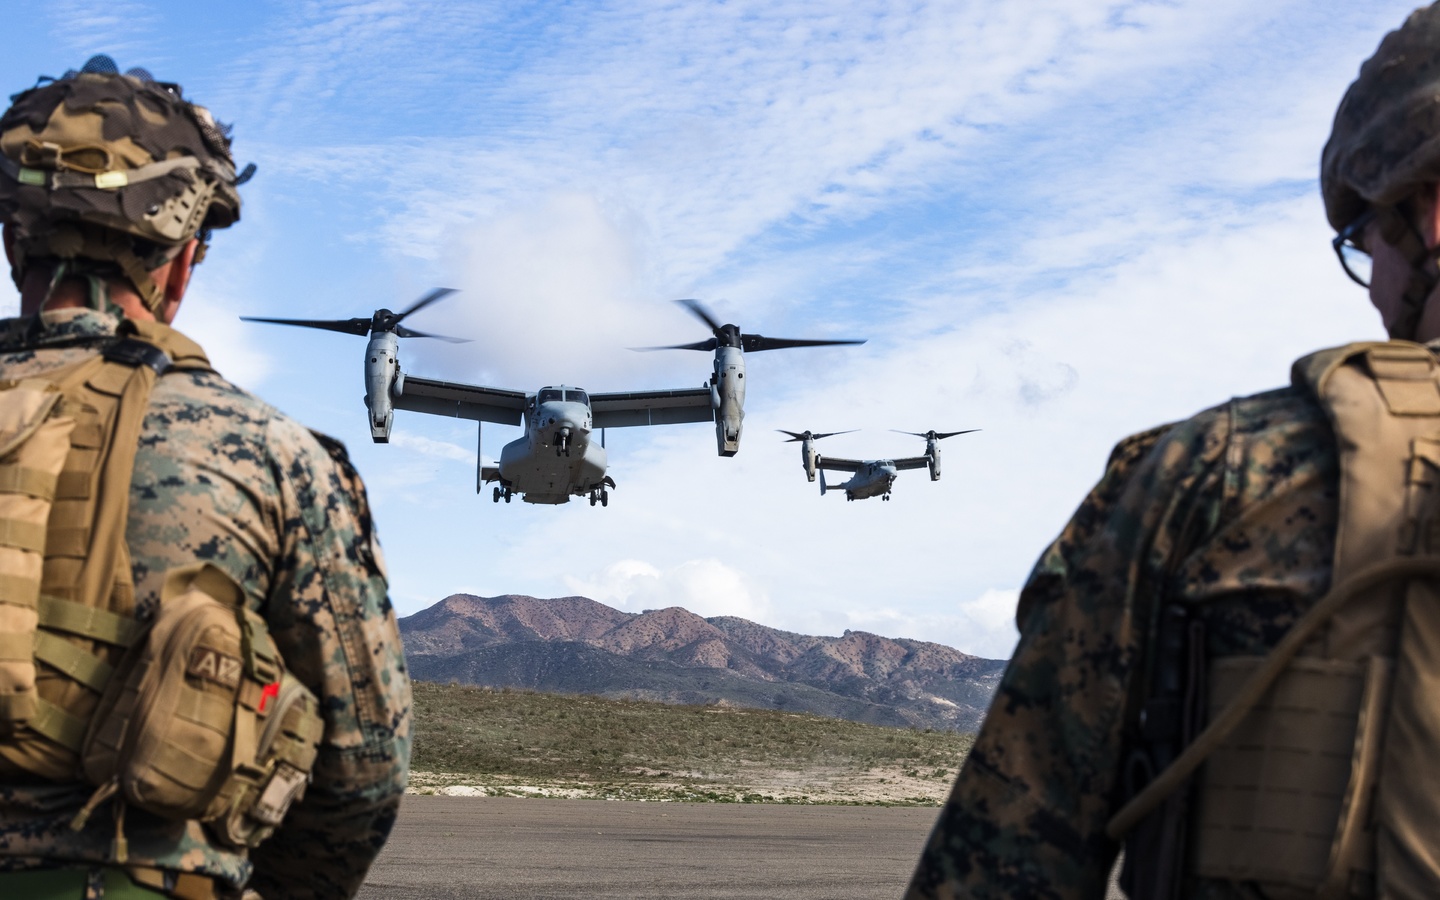 marine corps, bell boeing v-22 osprey, multi-mission tiltrotor military aircraft, california